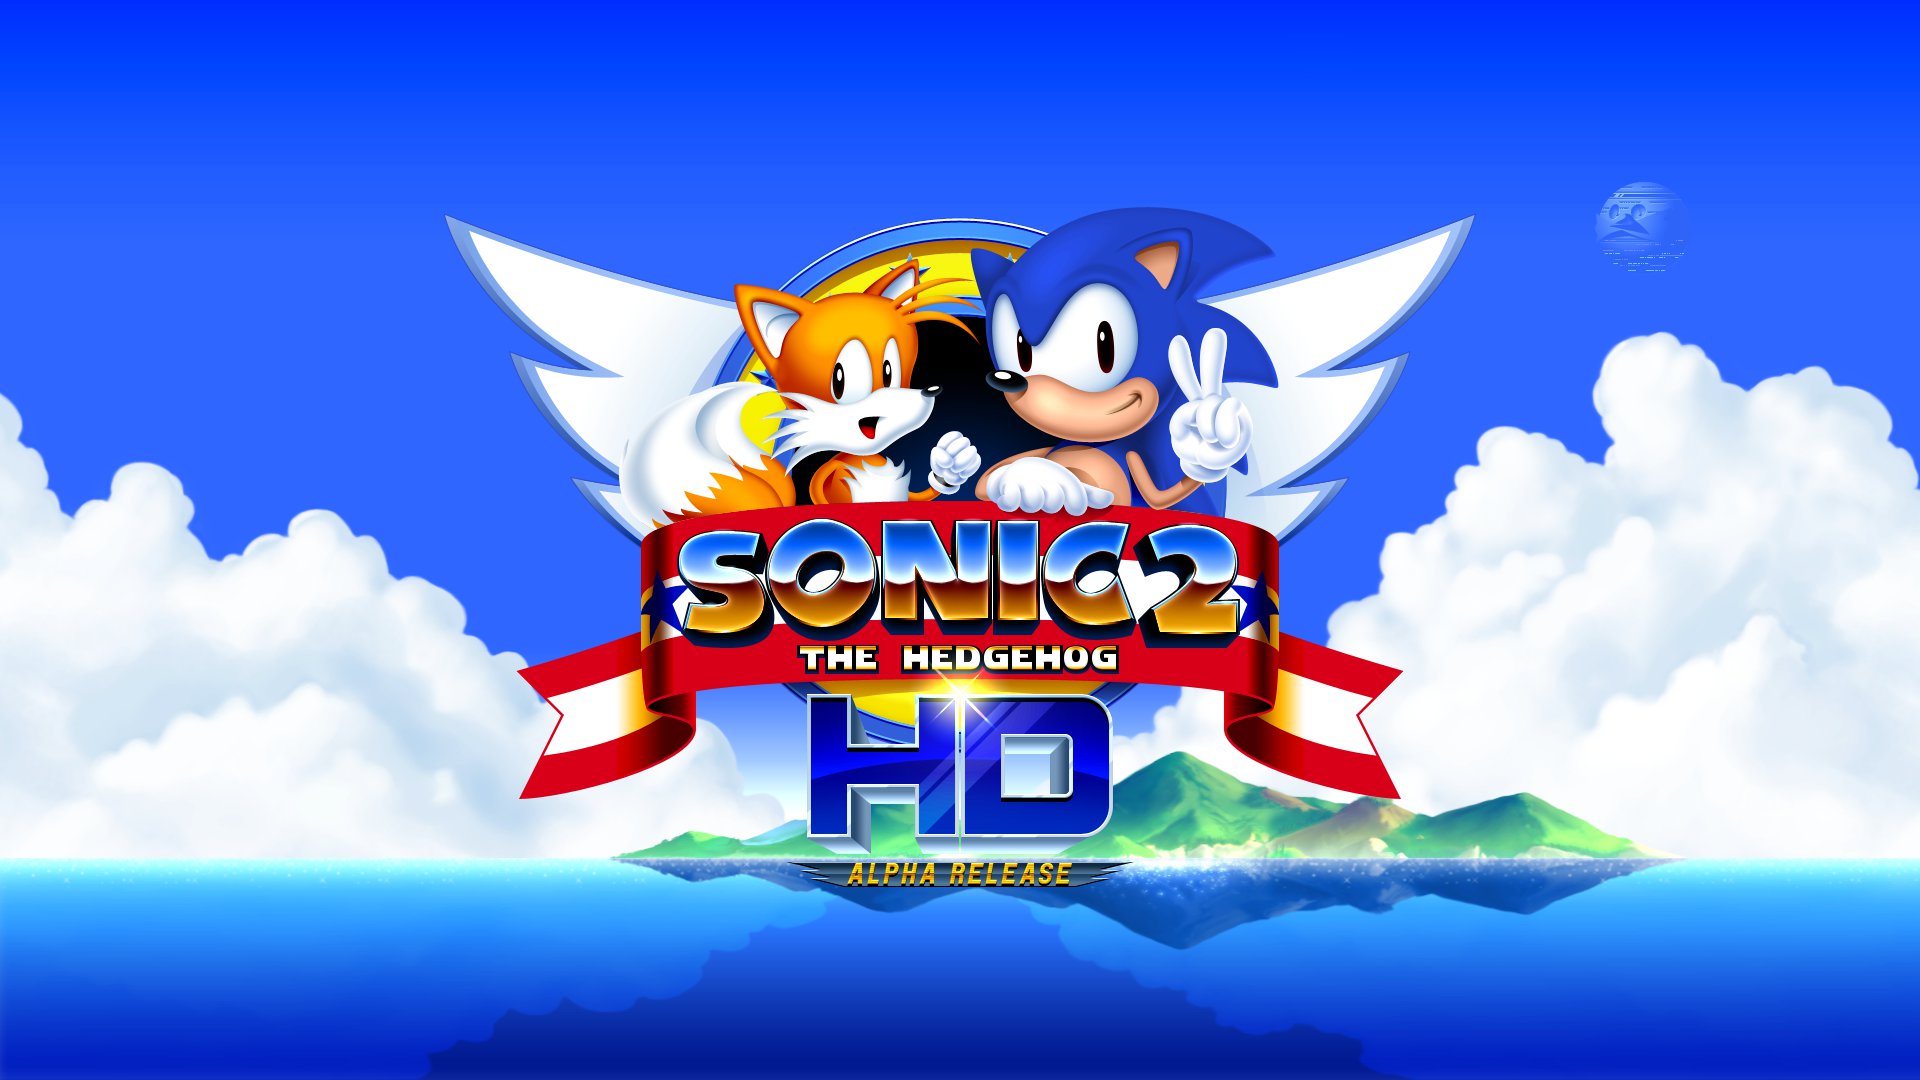 Sonic The Hedgehog 2 HD Project (Fan Game) - Is it any good?